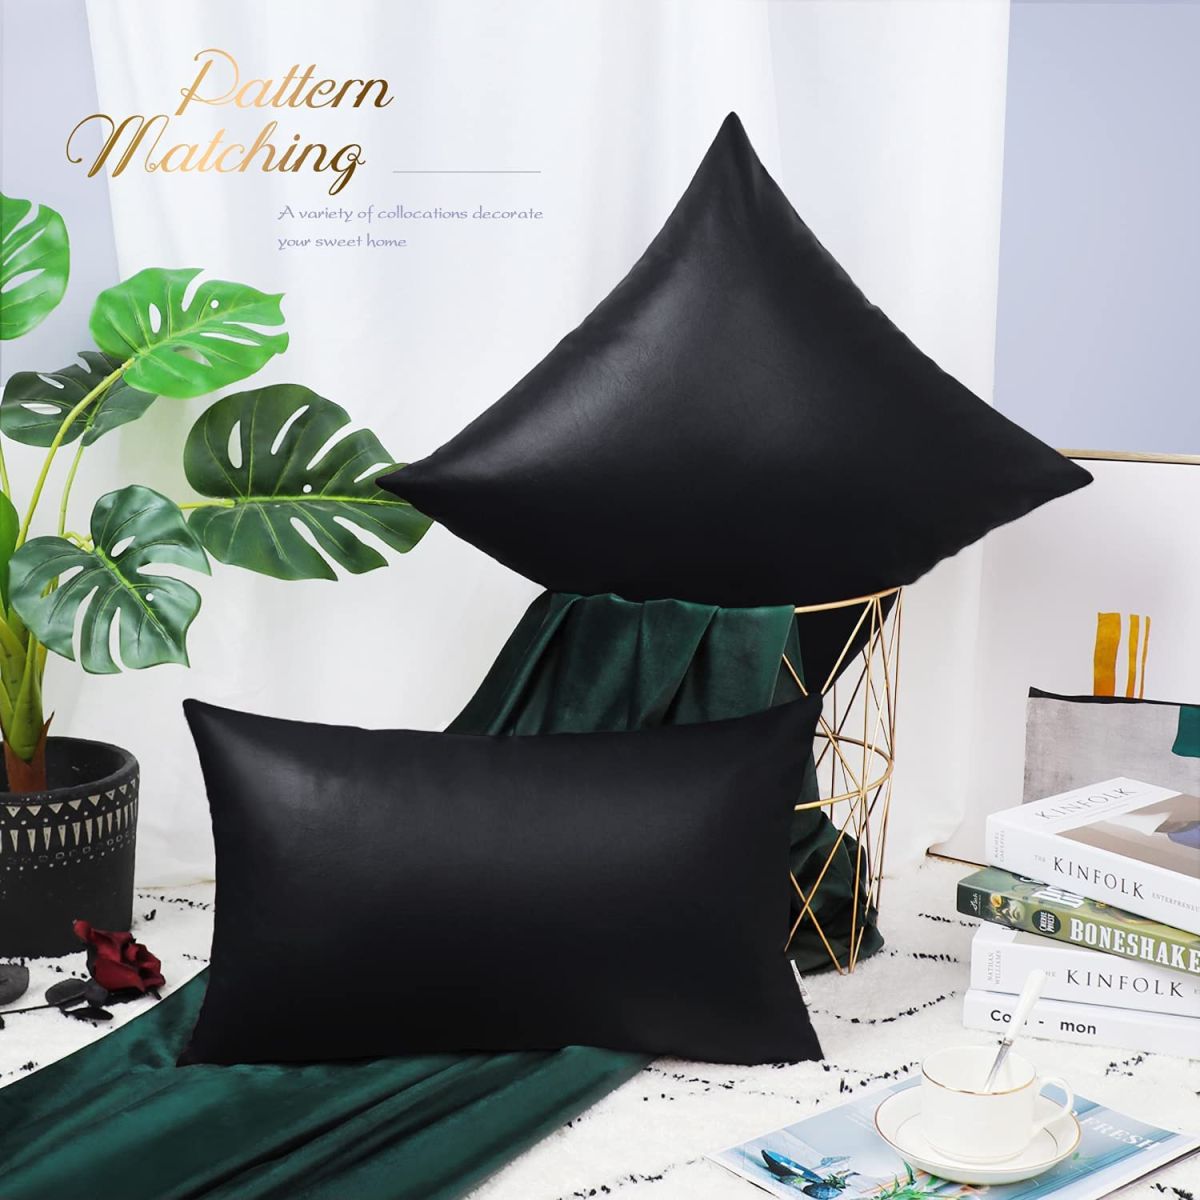 BRAWARM Faux Leather Throw Pillow Covers 12 X 20 Inches - Black Leather Lumbar Pilow Covers Pack of 2, Solid Dyed Leather Pillowcases for Couch Bed Sofa Garden Home Decorative